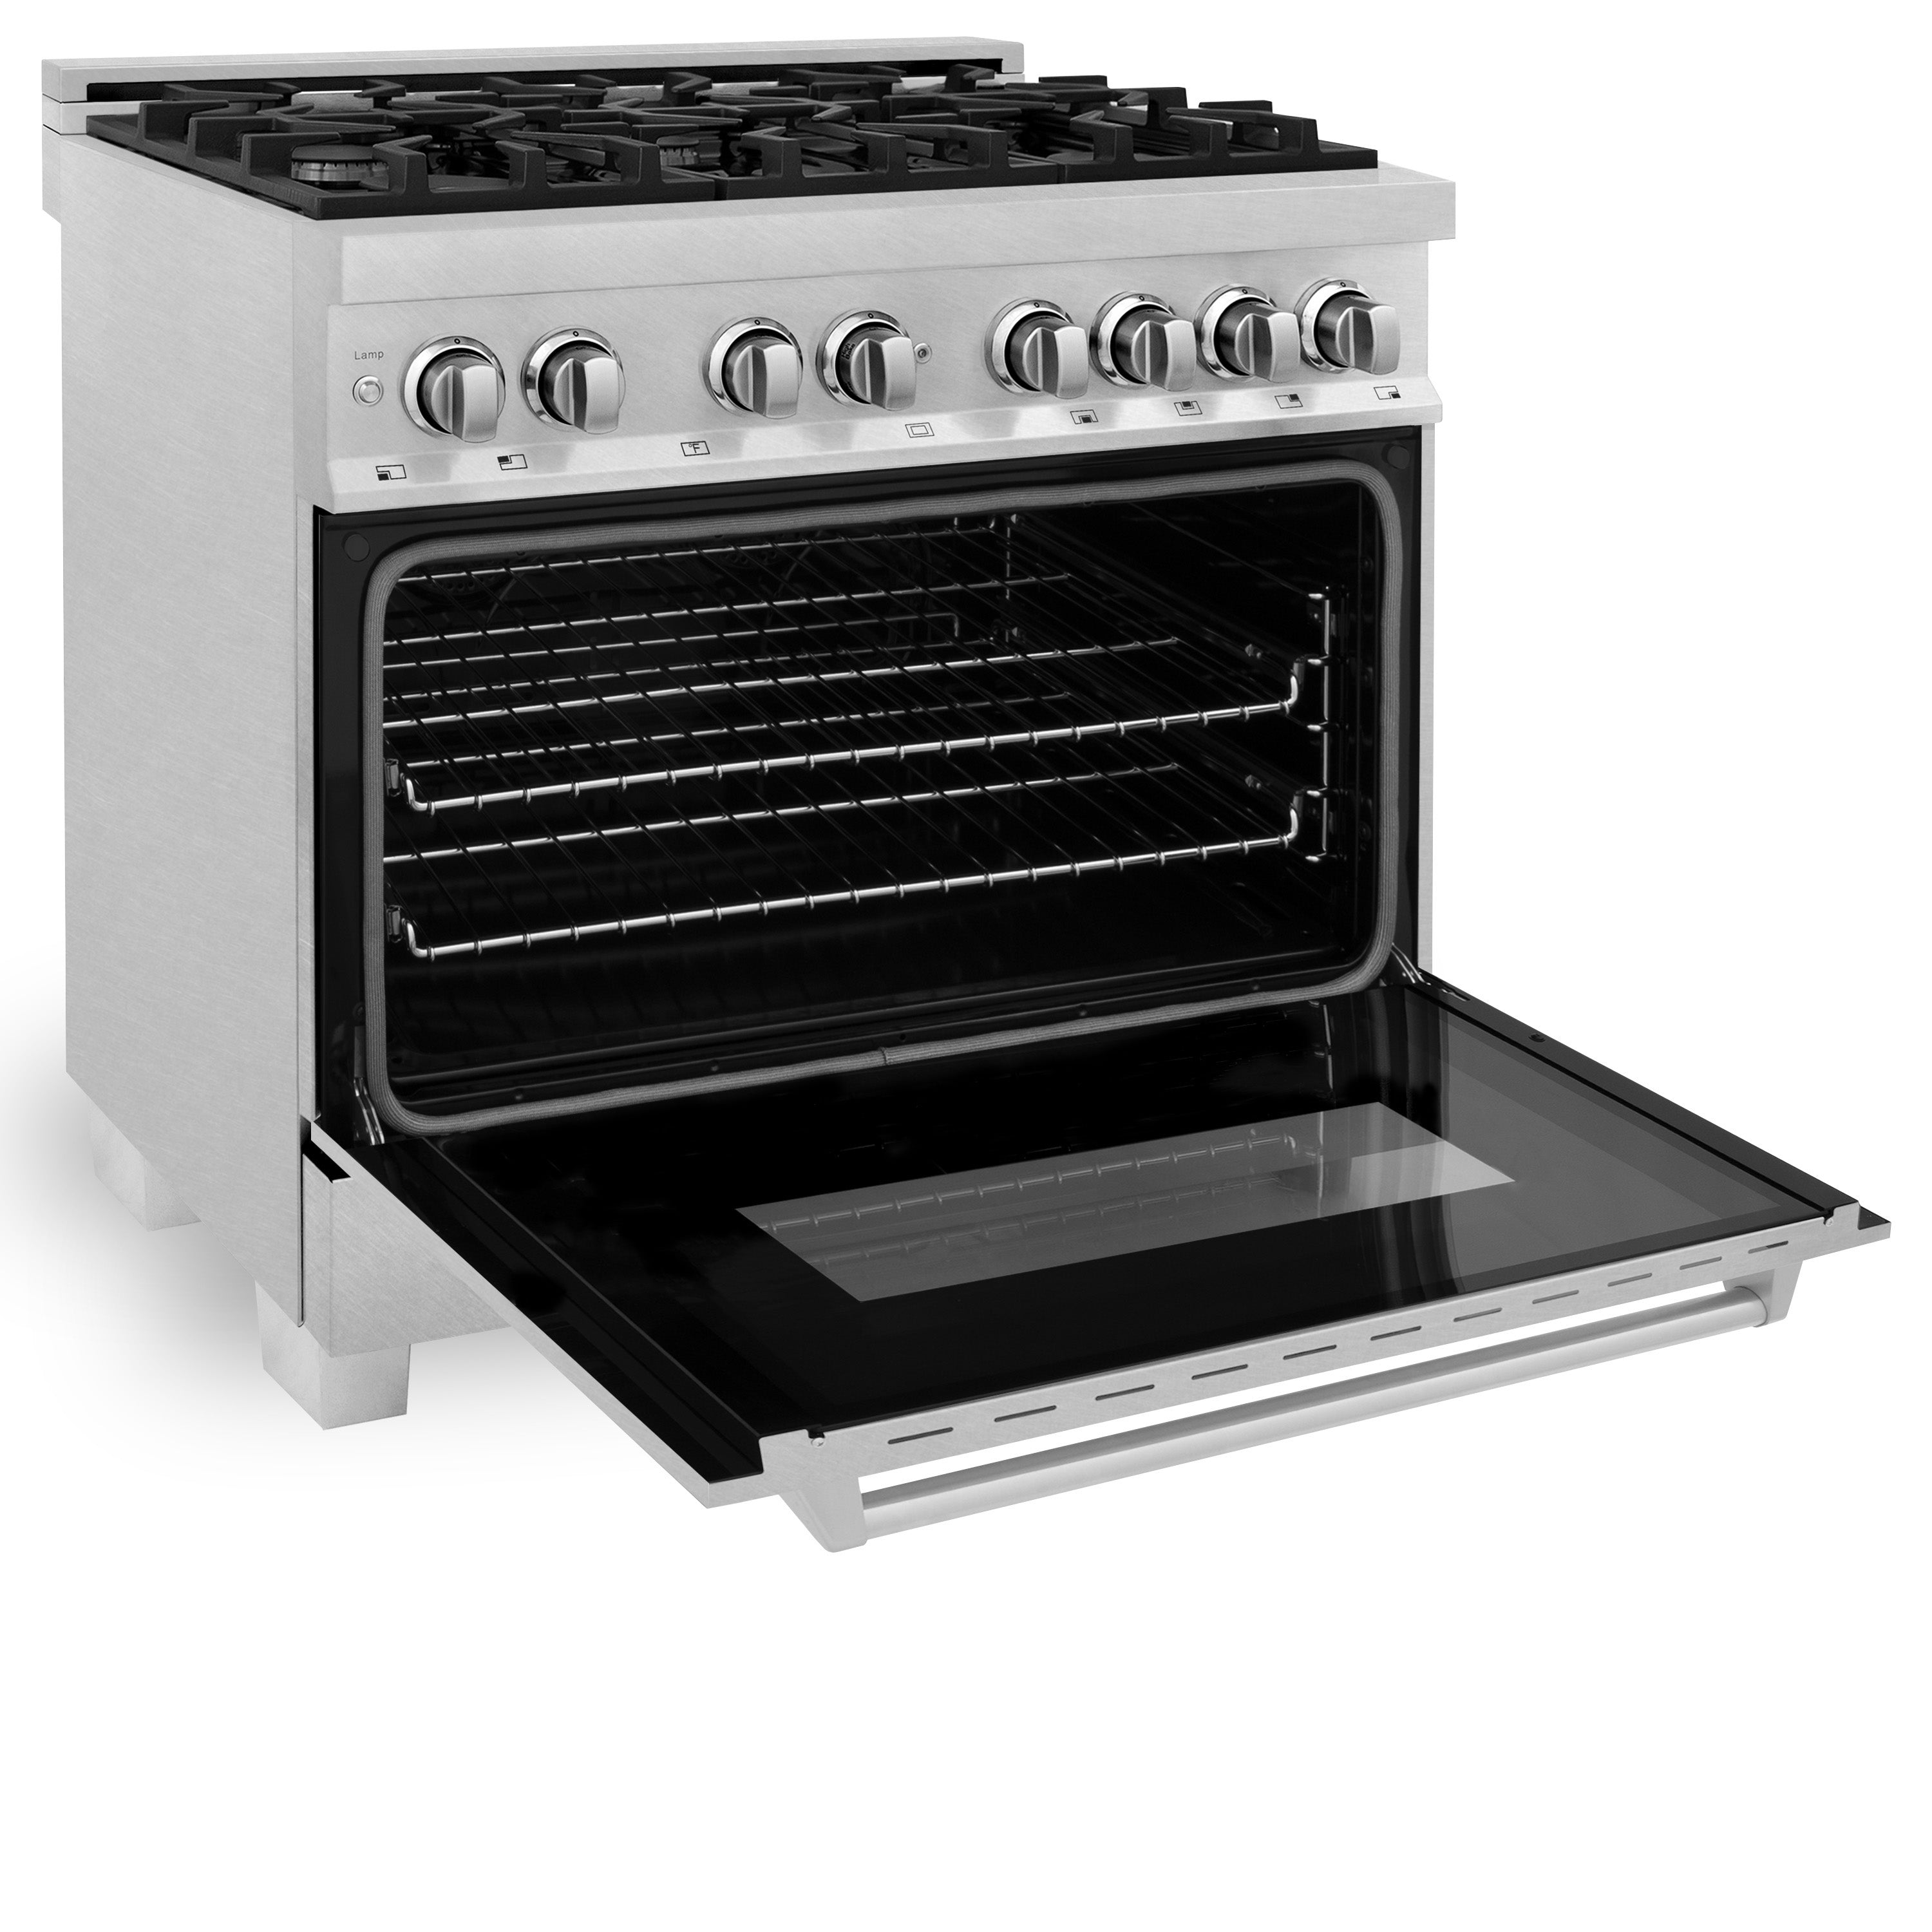 ZLINE 36" 4.6 cu. ft. Dual Fuel Range with Gas Stove and Electric Oven in in Fingerprint Resistant Stainless Steel (RAS-SN-36)